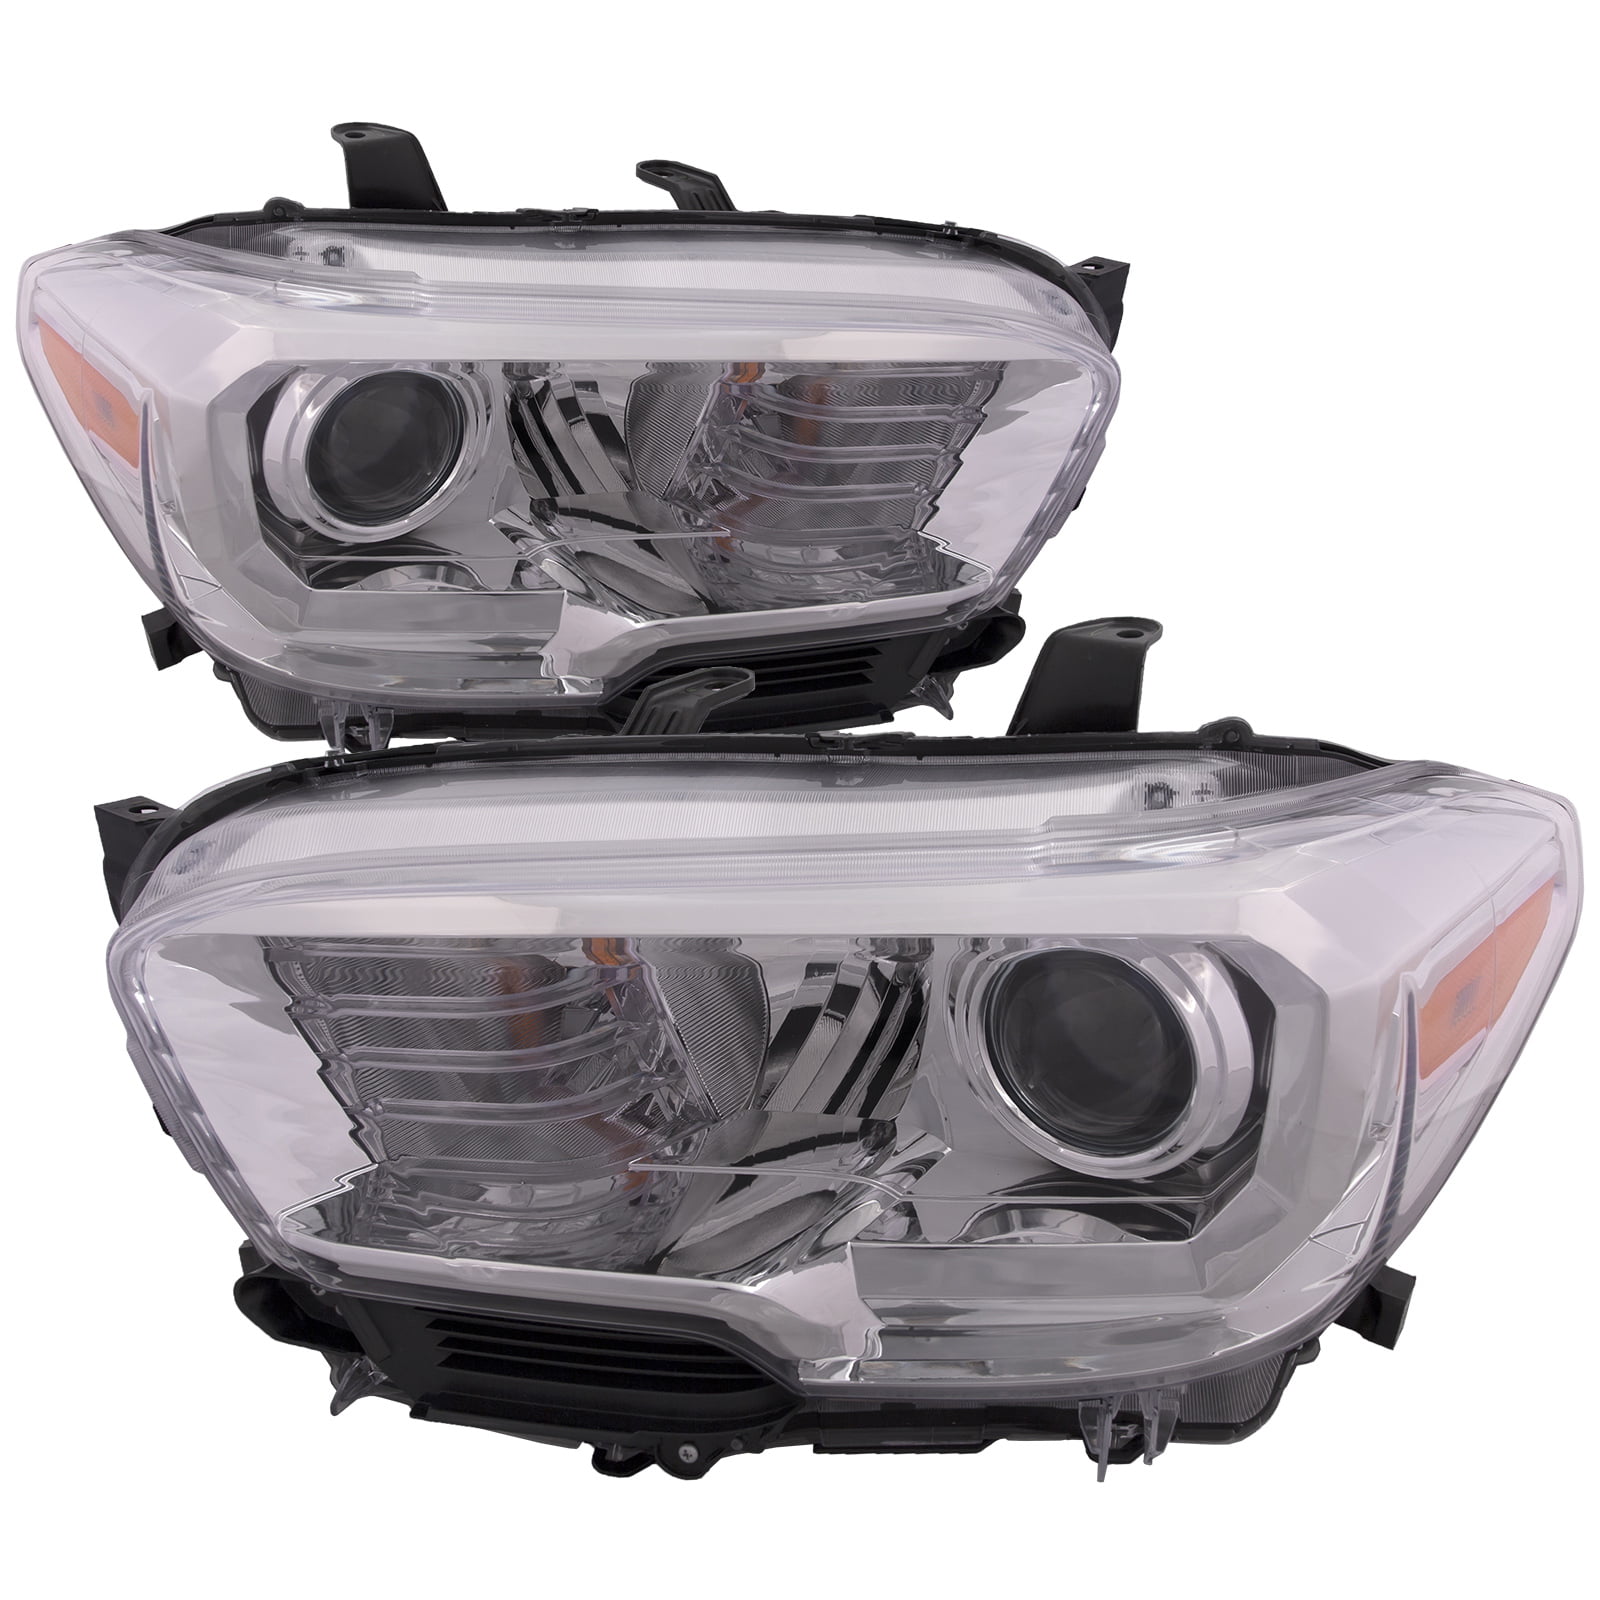 HEADLIGHTSDEPOT Chrome Housing Halogen Headlight Compatible with Ford Taurus 2000-2007 Includes Left Driver and Right Passenger Side Headlamps